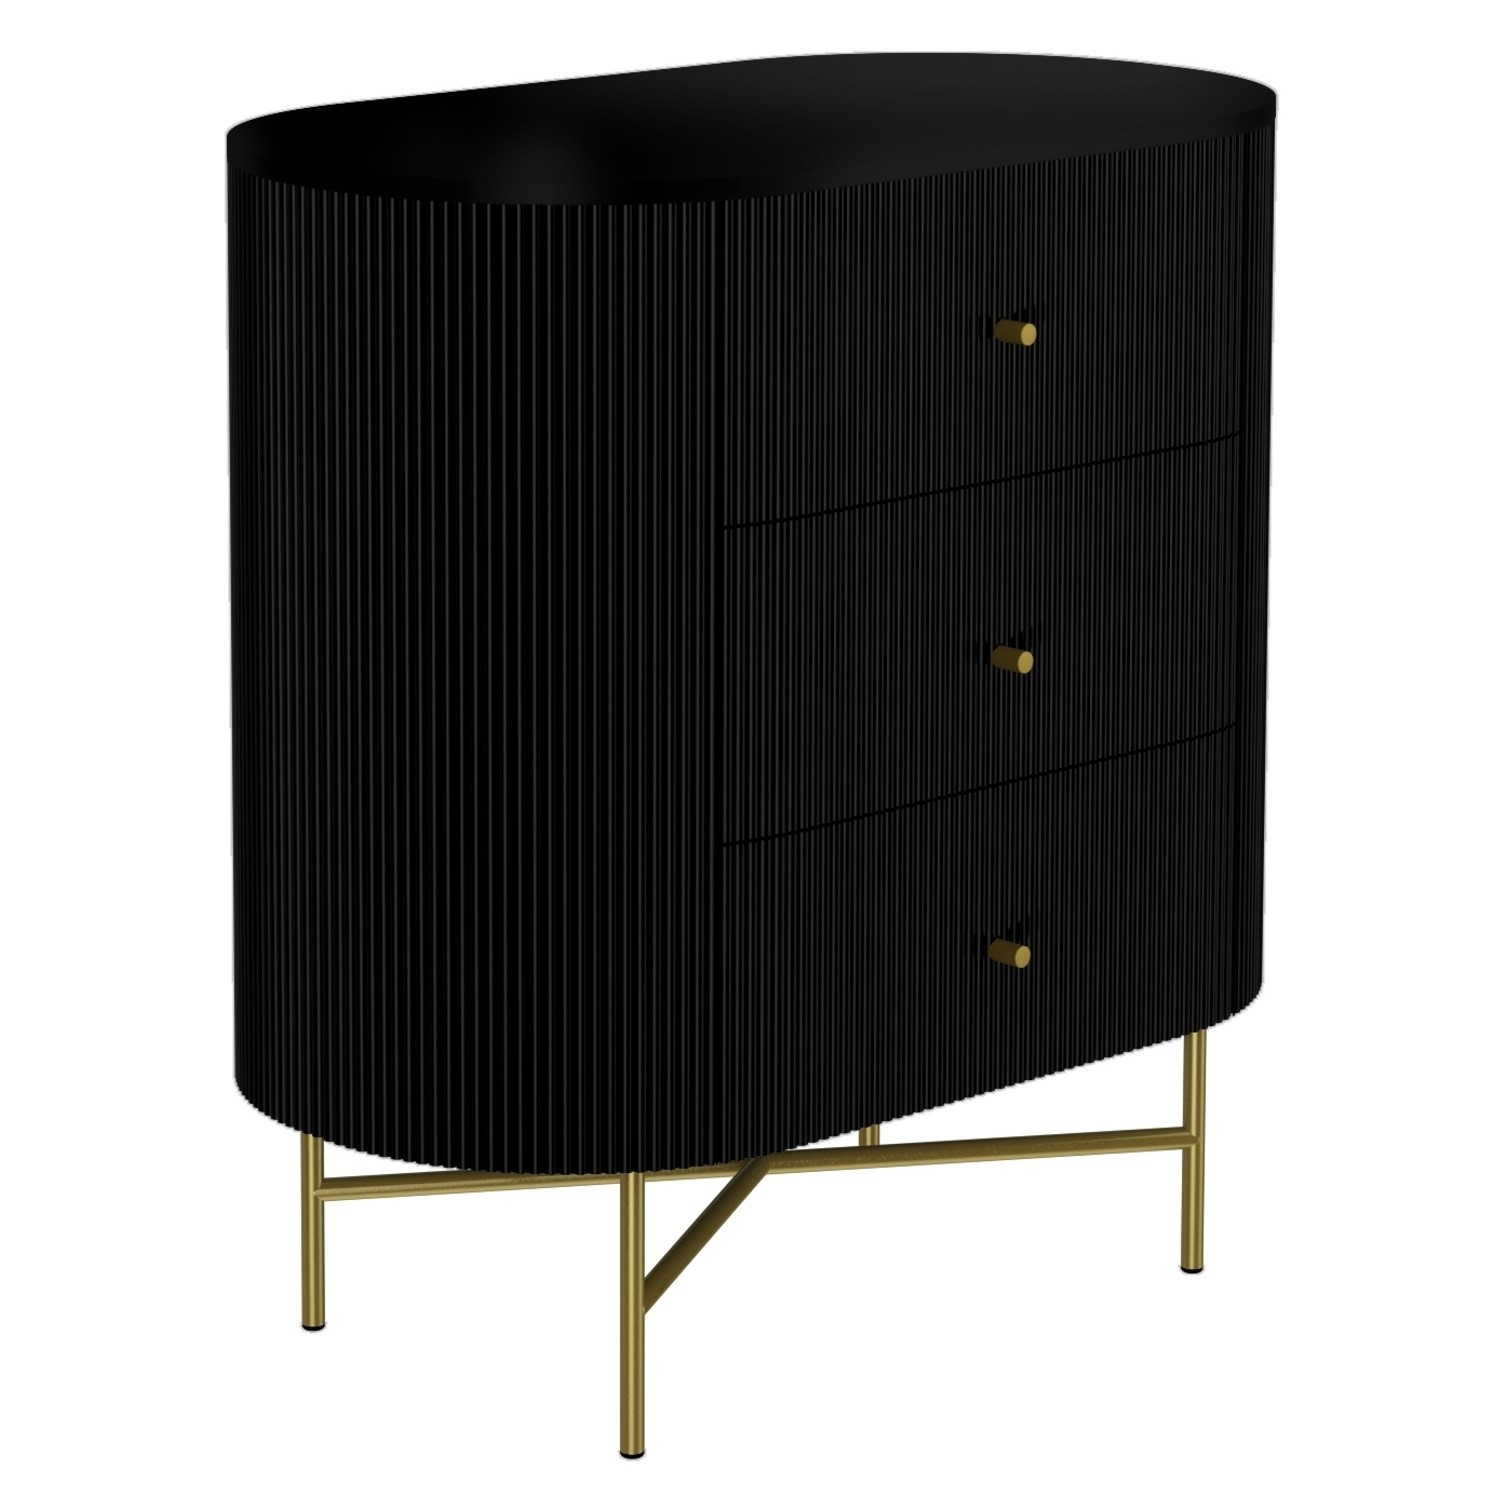 Read more about Curved black art deco chest of 3 drawers enzo